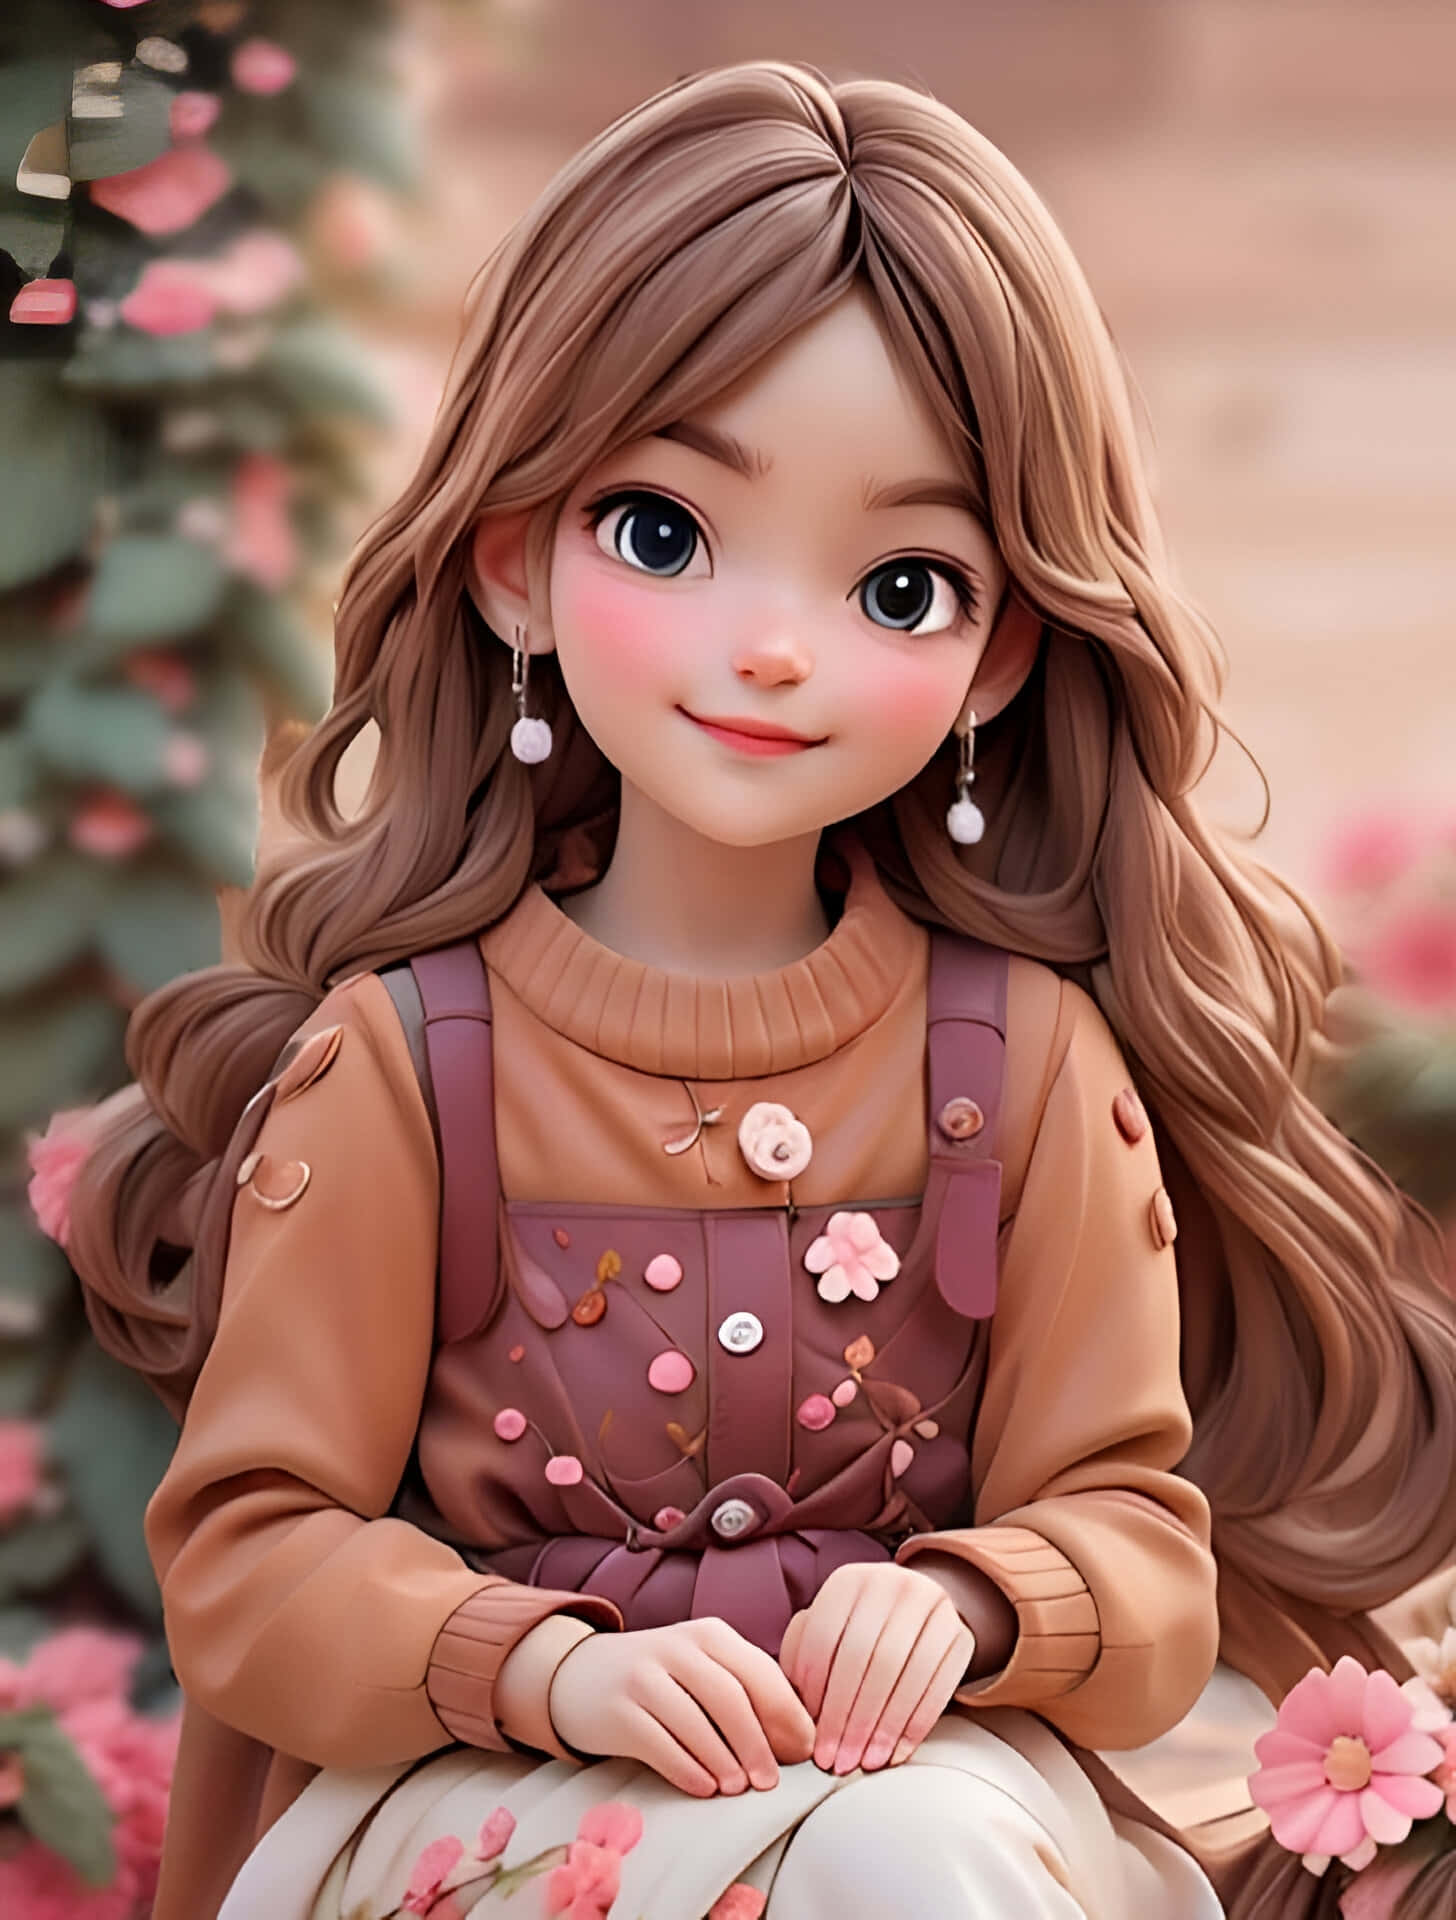 Animated Little Girl With Brown Hair Wallpaper